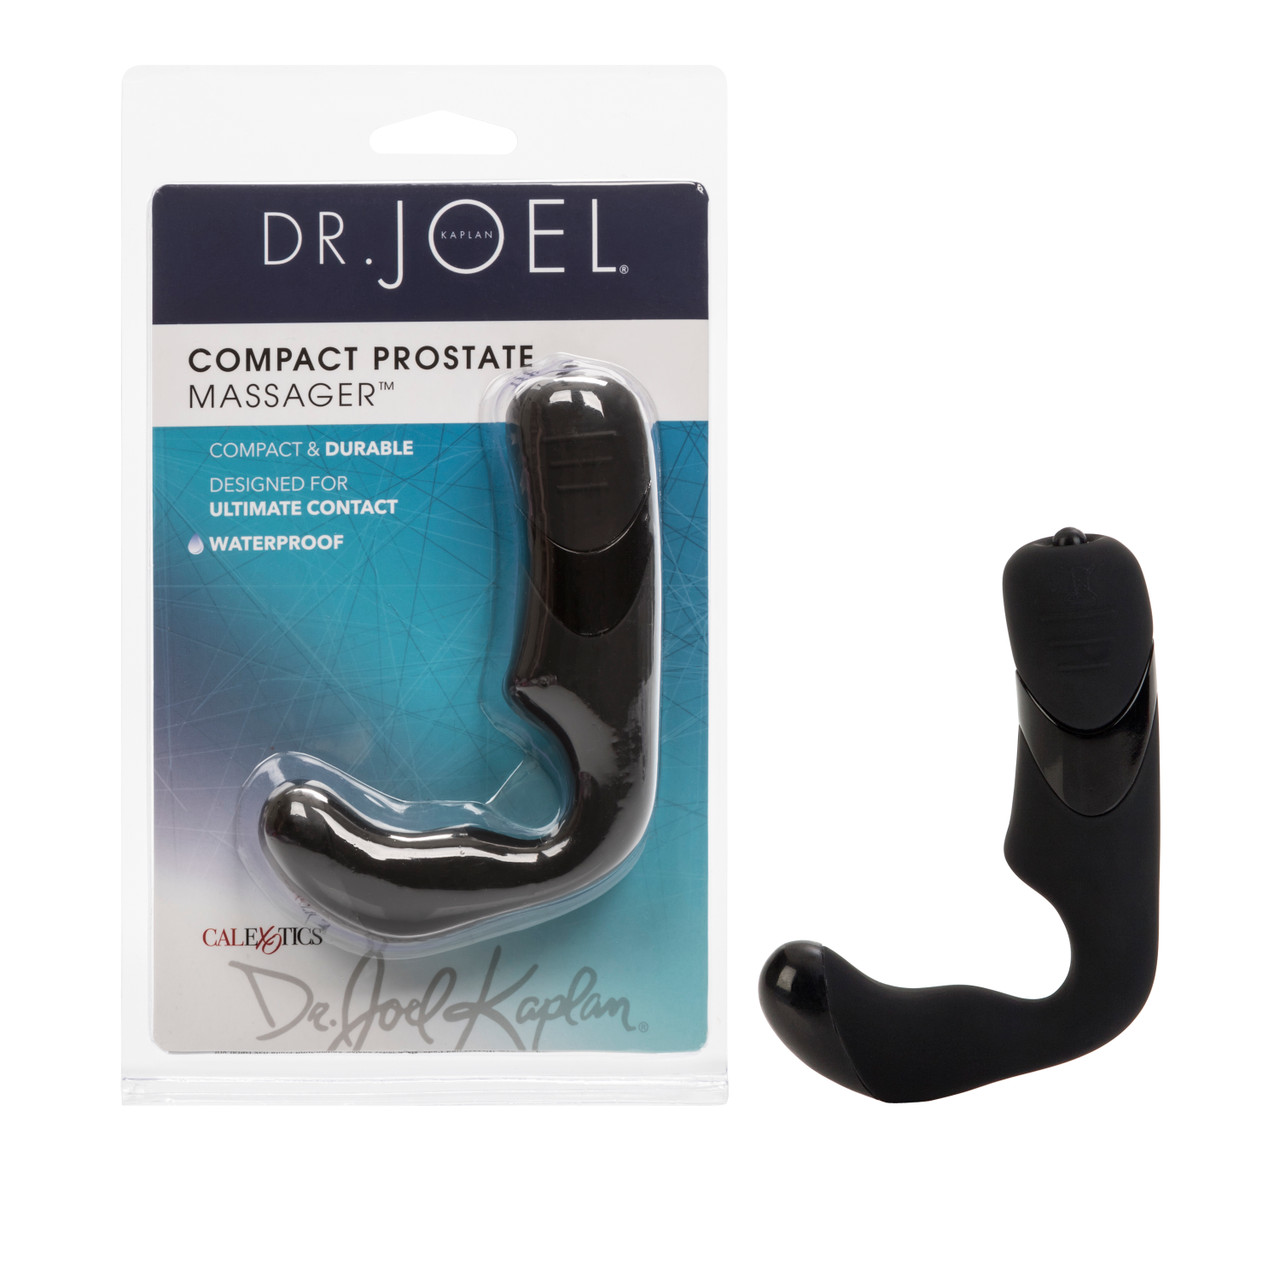 DR JOEL COMPACT PROSTATE MASSAGER - Click Image to Close